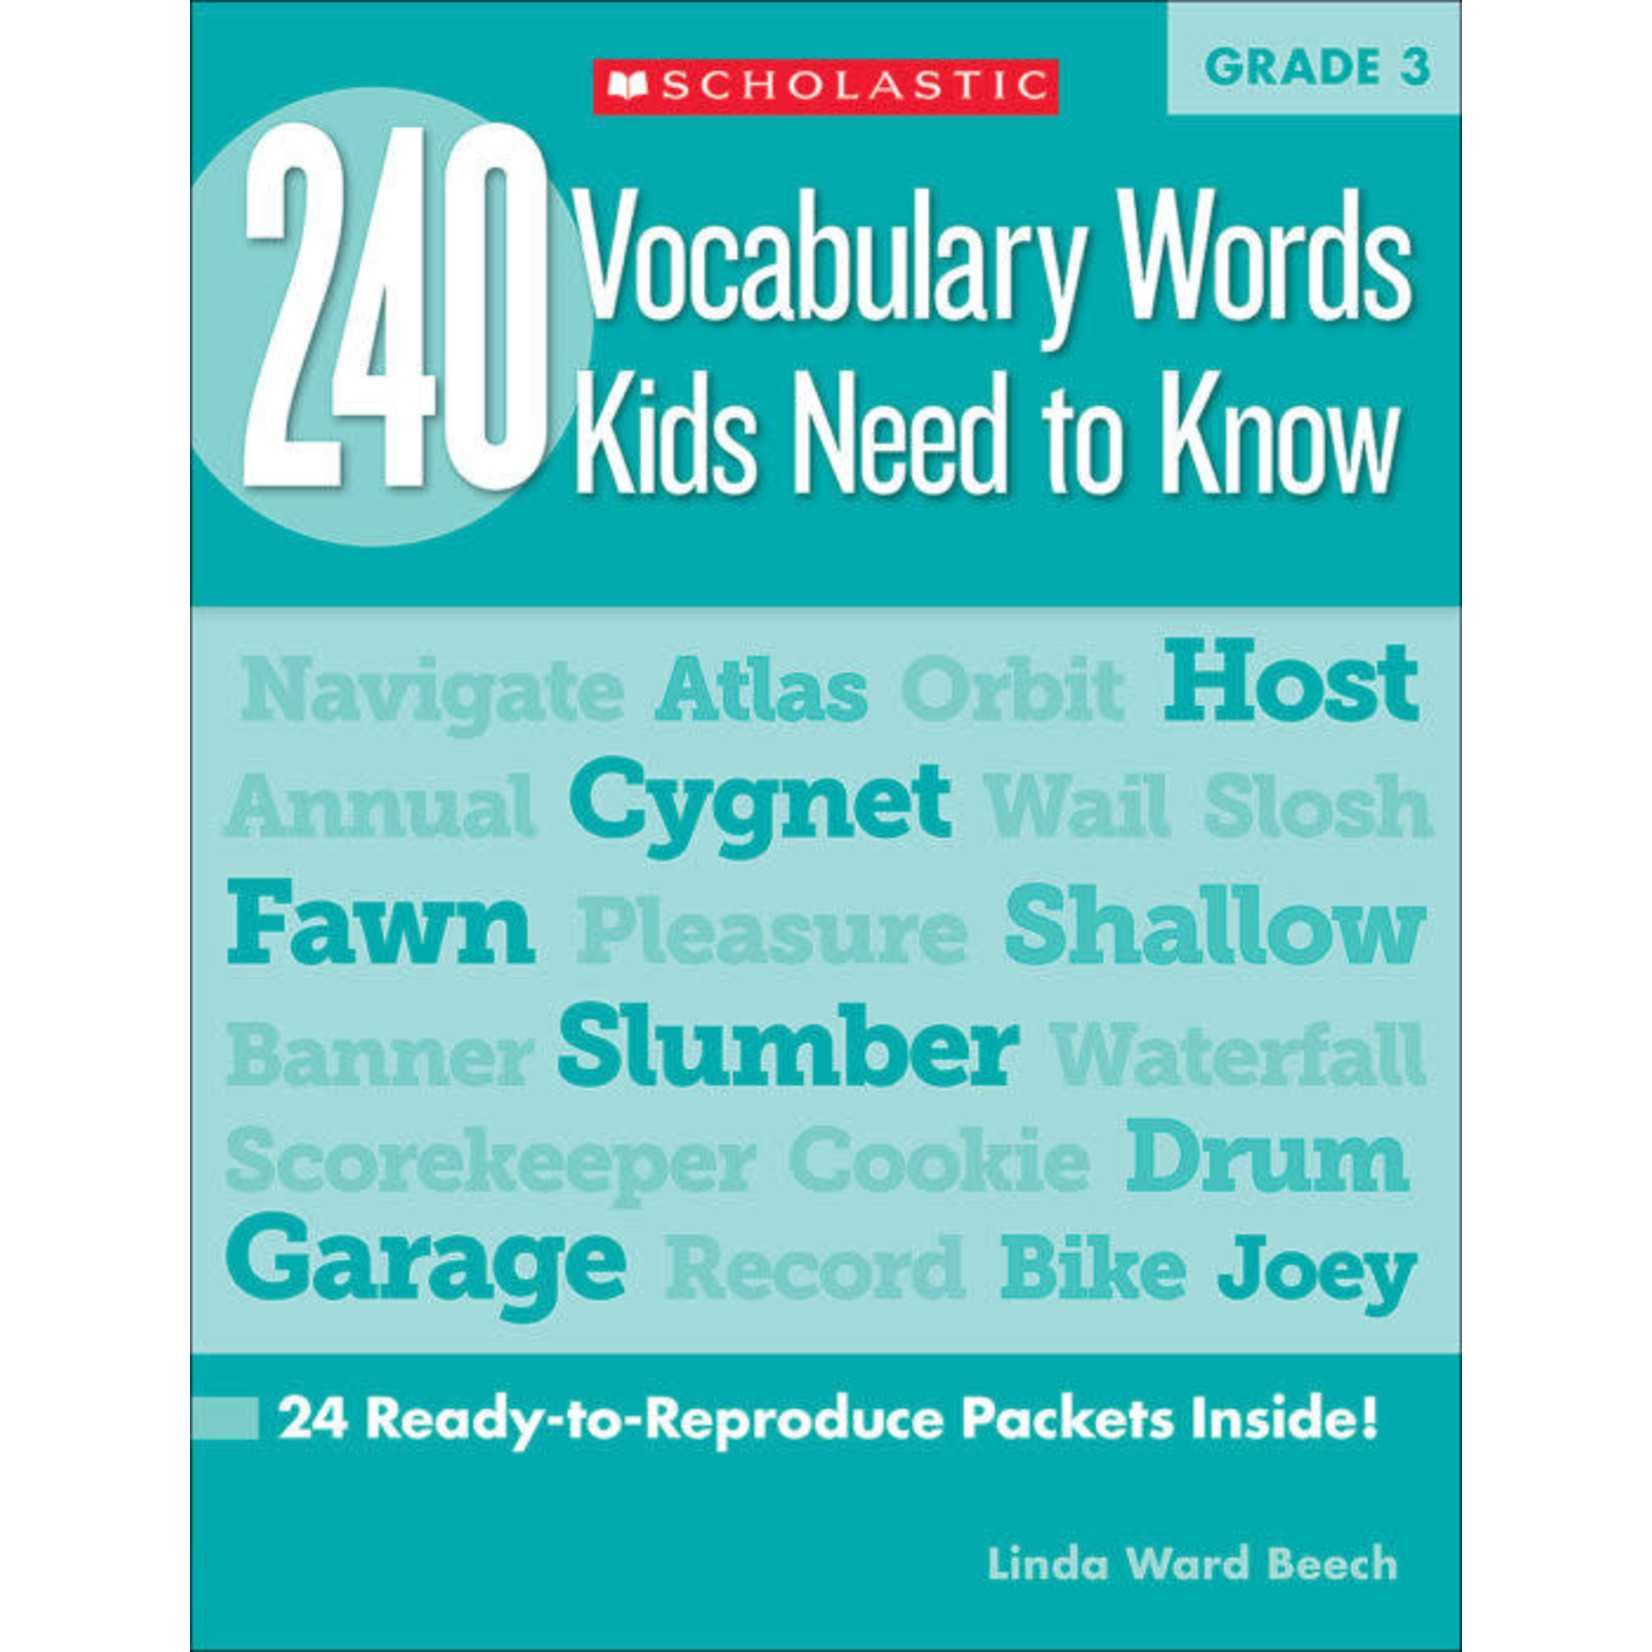 SCHOLASTIC TEACHING RESOURCES 240 Vocabulary Words Kids Need to Know: Grade 3